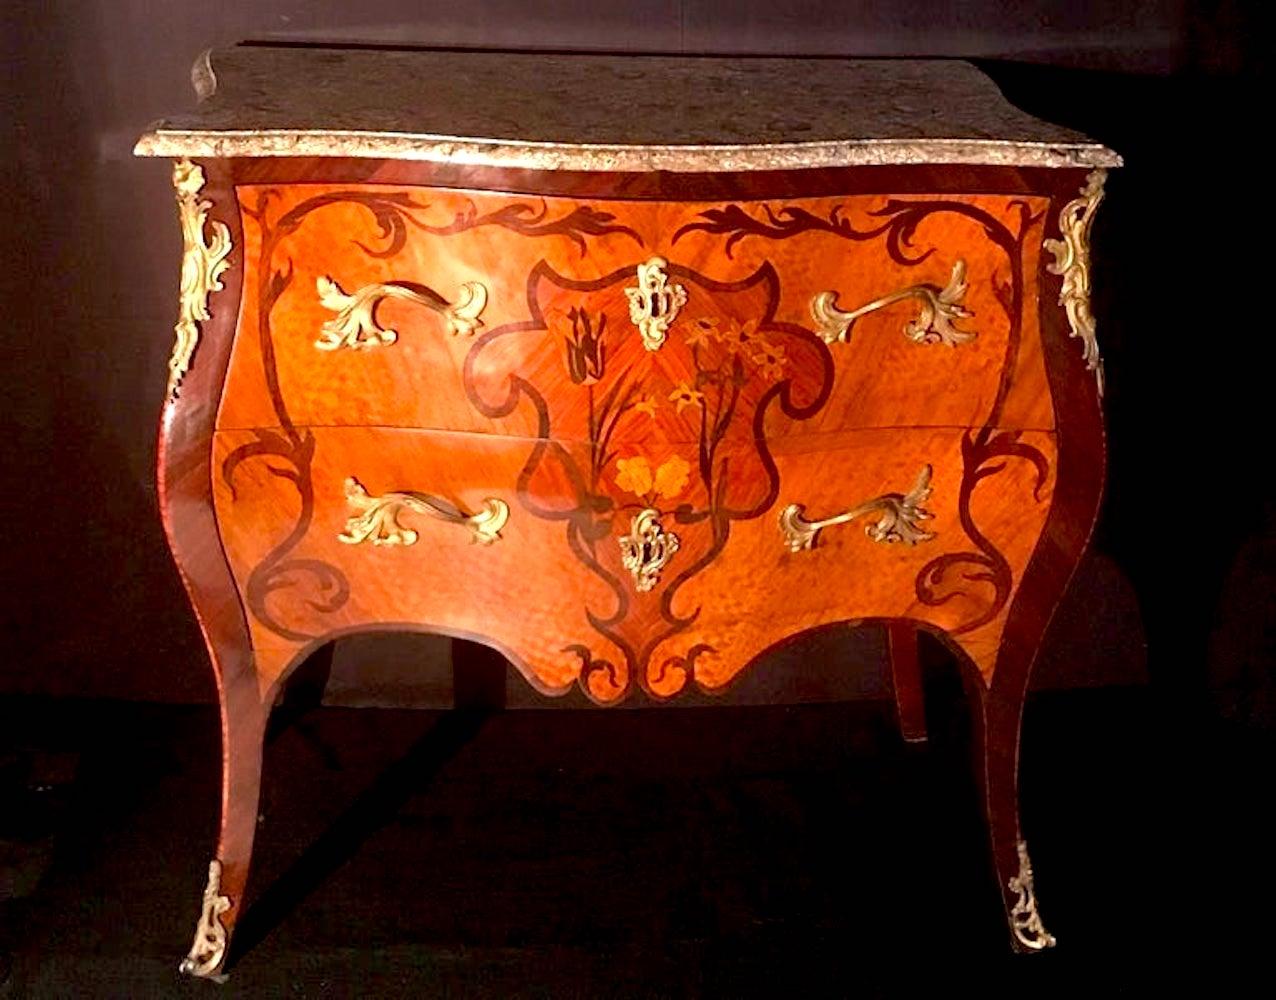 Elegant  Louis XV French 18th century Commode  with 'Lumachella' marble-top above two drawers decorated sans travers and ormolu mounts.
Fine detailed floral inlay with various noble woods. Finely chiseled and gild original bronze fittings.
 Restored